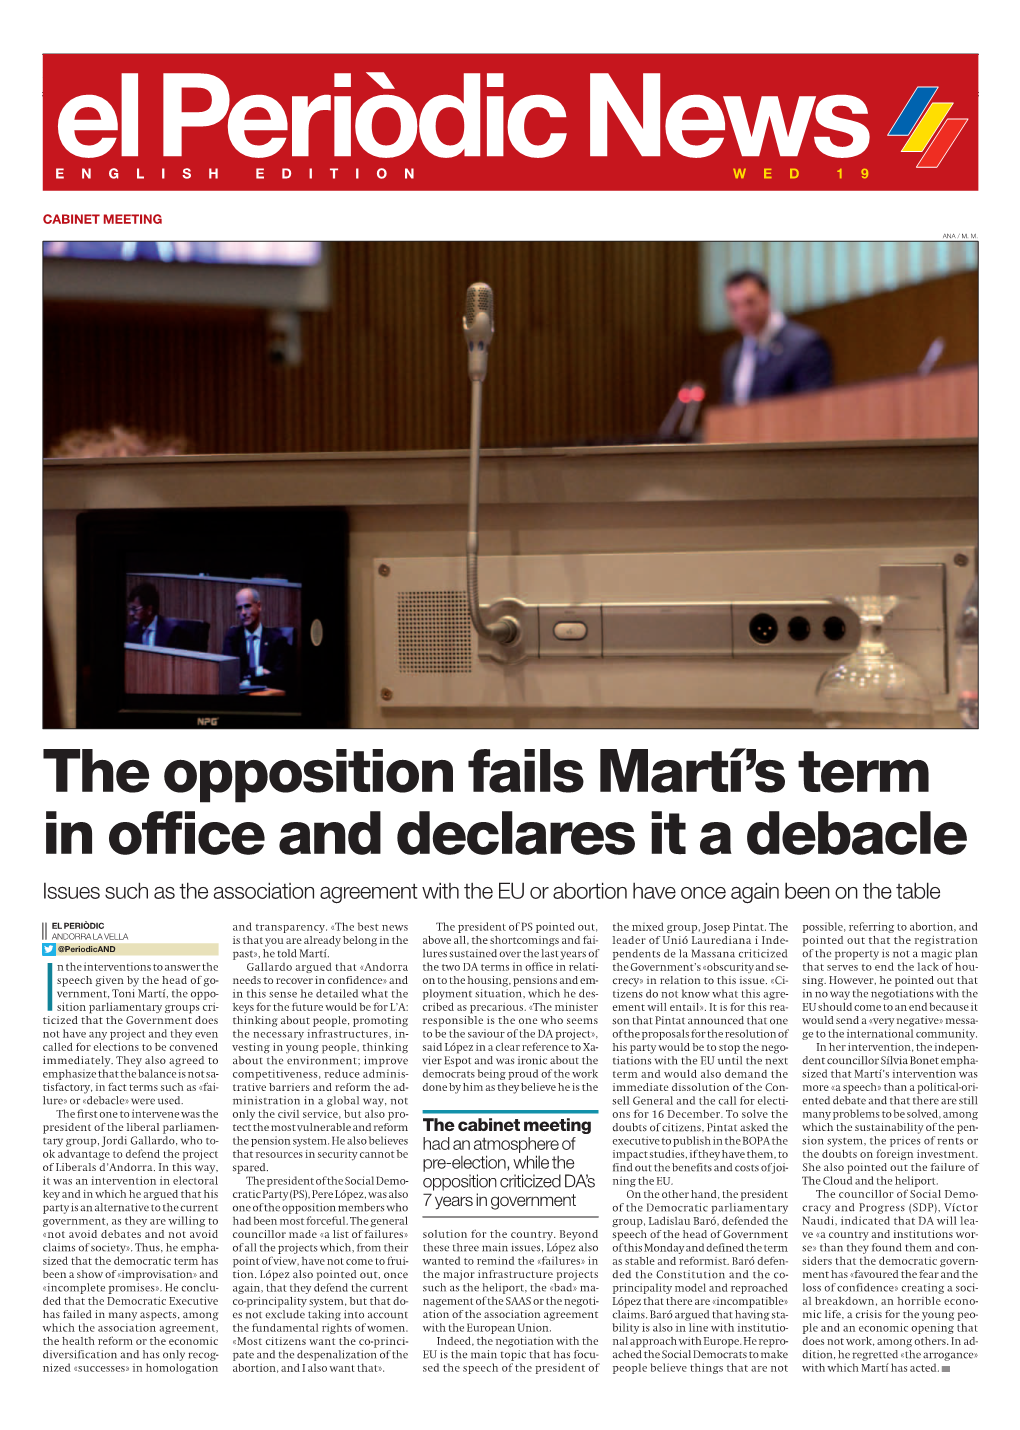 The Opposition Fails Martí's Term in Office and Declares It a Debacle